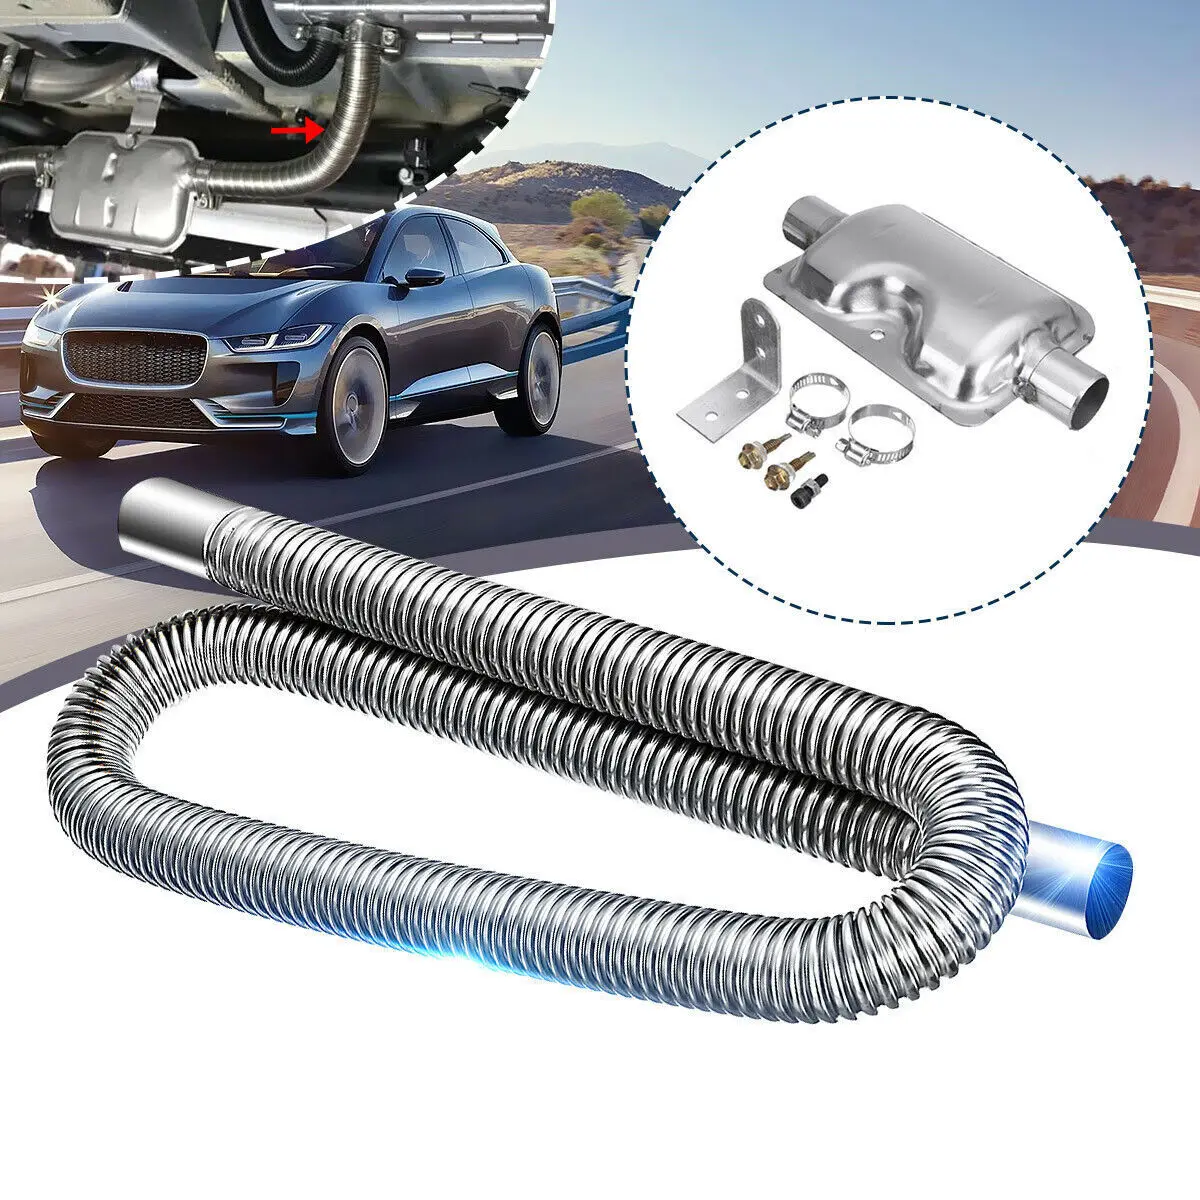 

300cm Stainless Exhaust Muffler Silencer Clamps Bracket Gas Vent Hose Pipe Silence Kit For Car Air Diesels Heater Kit